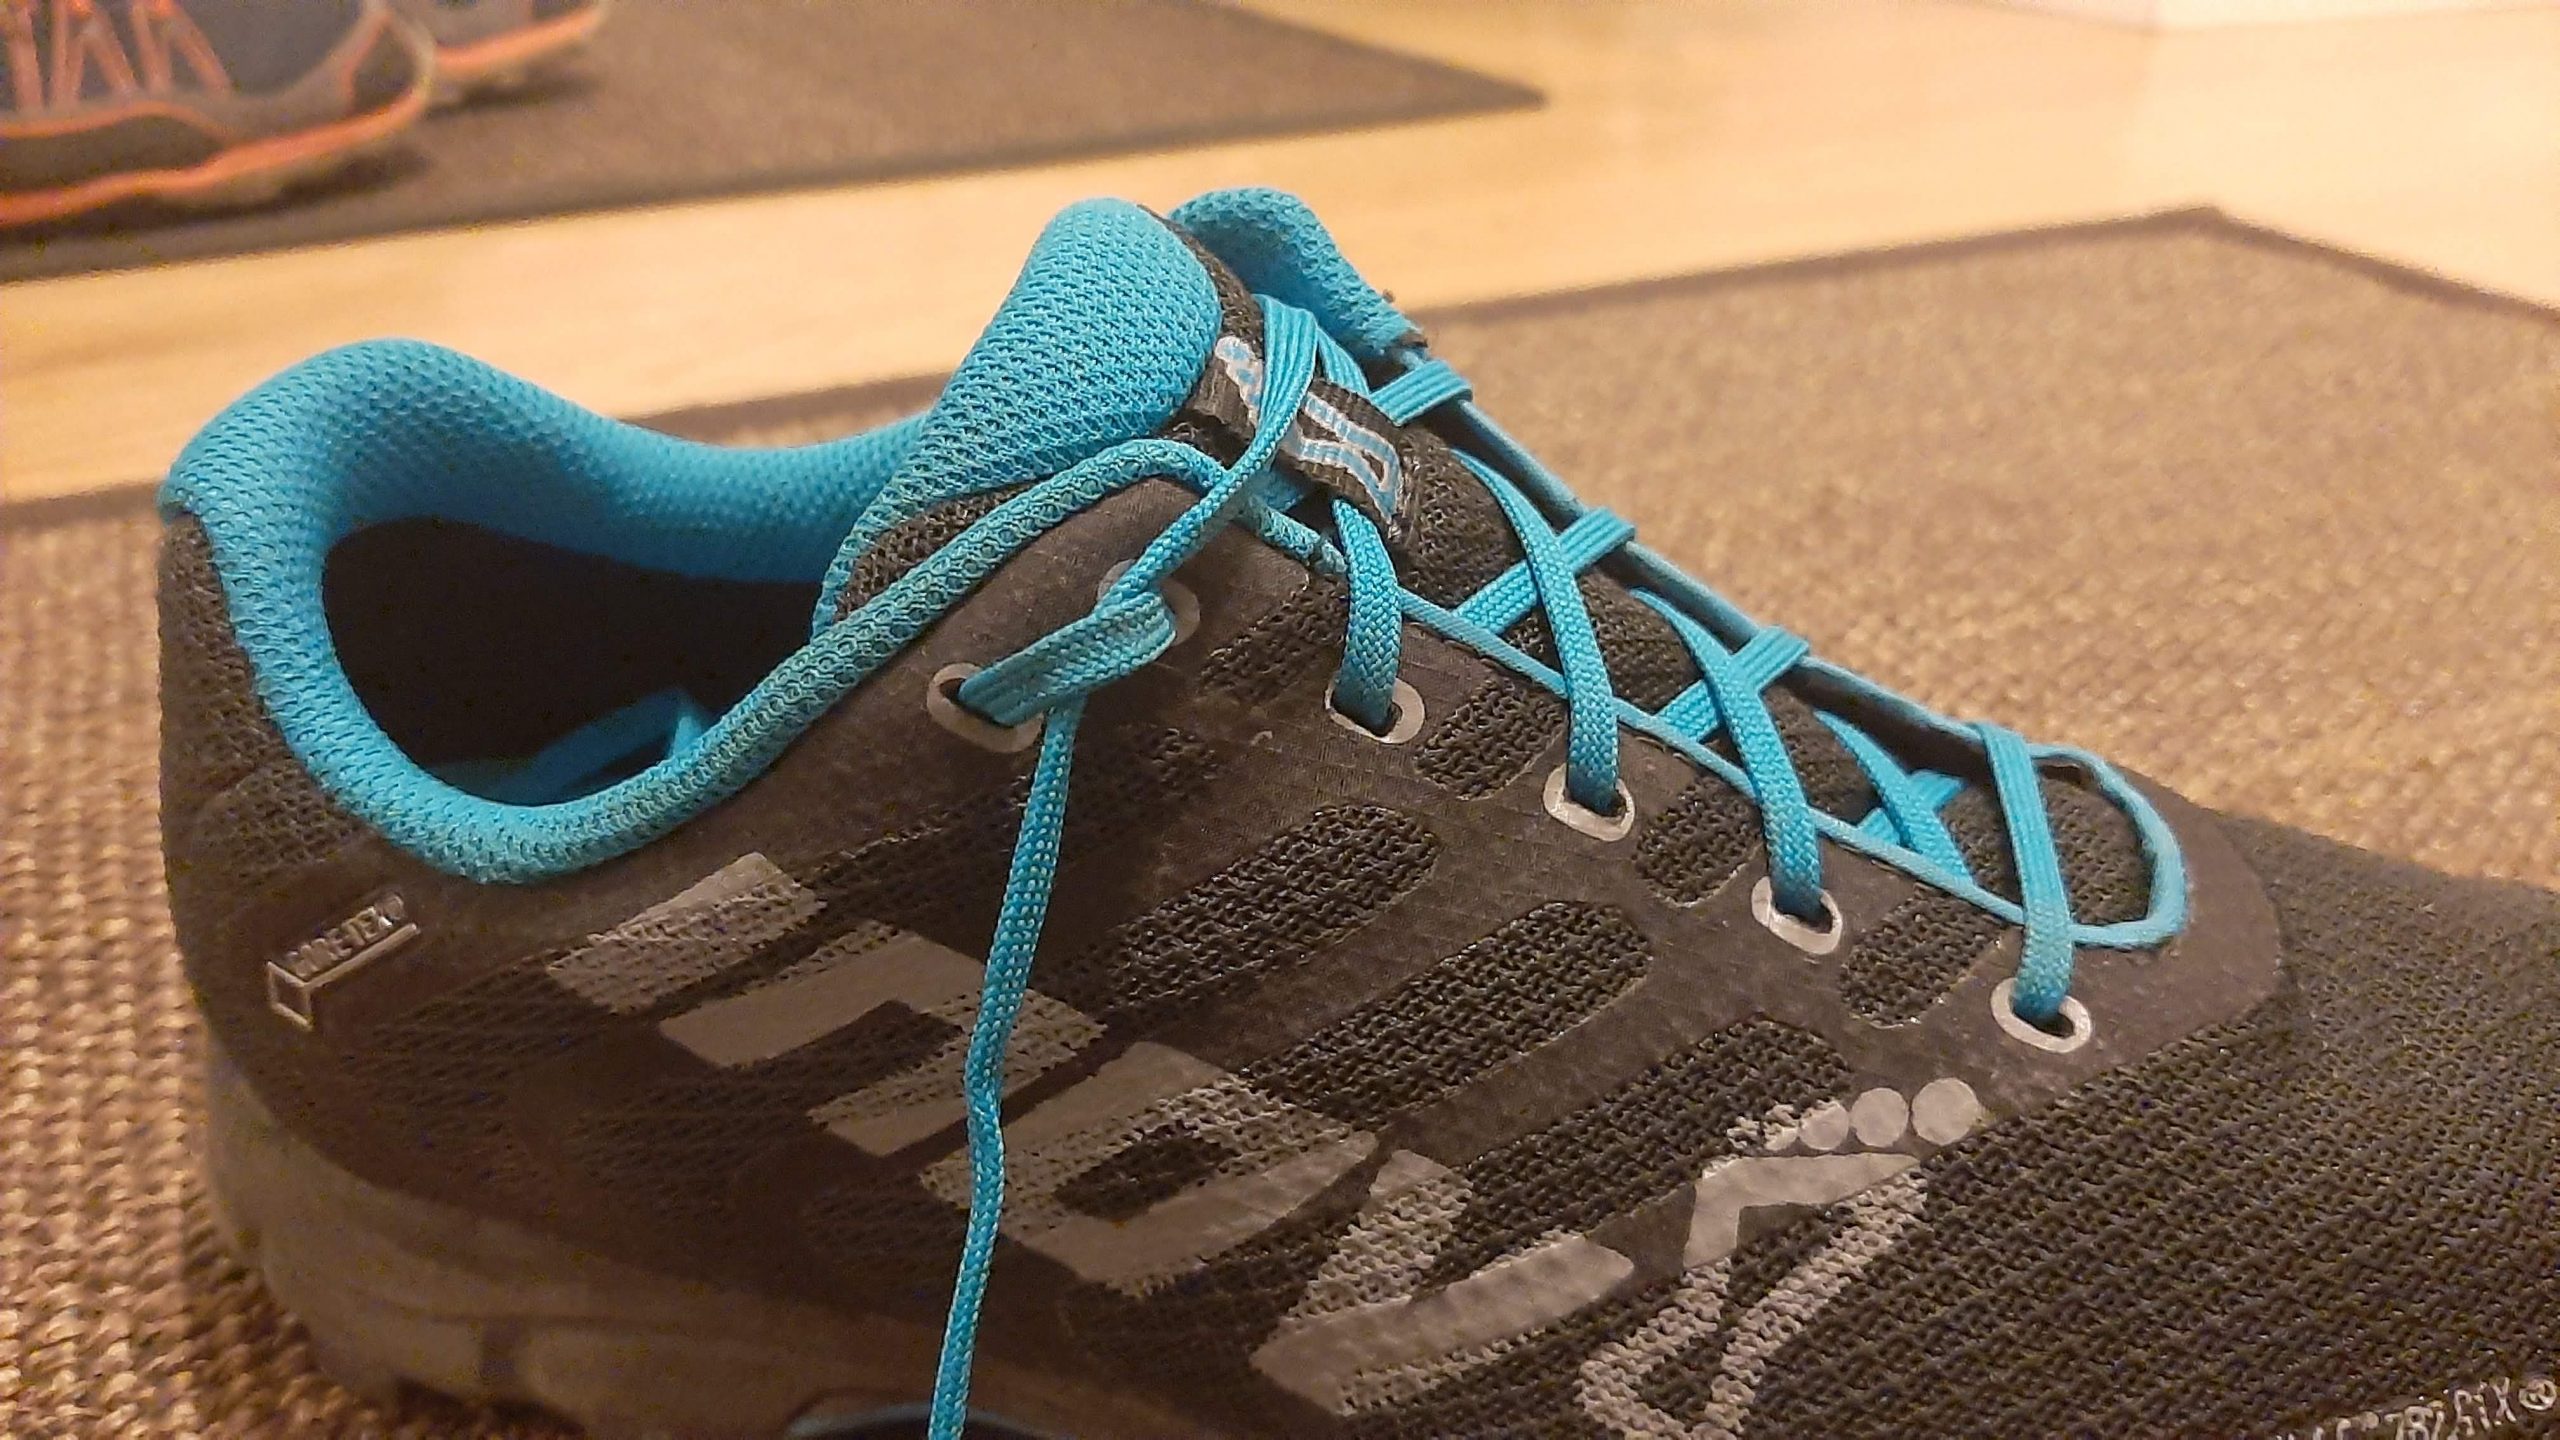 Training Shoes Tip #1 – Use lock-lacing